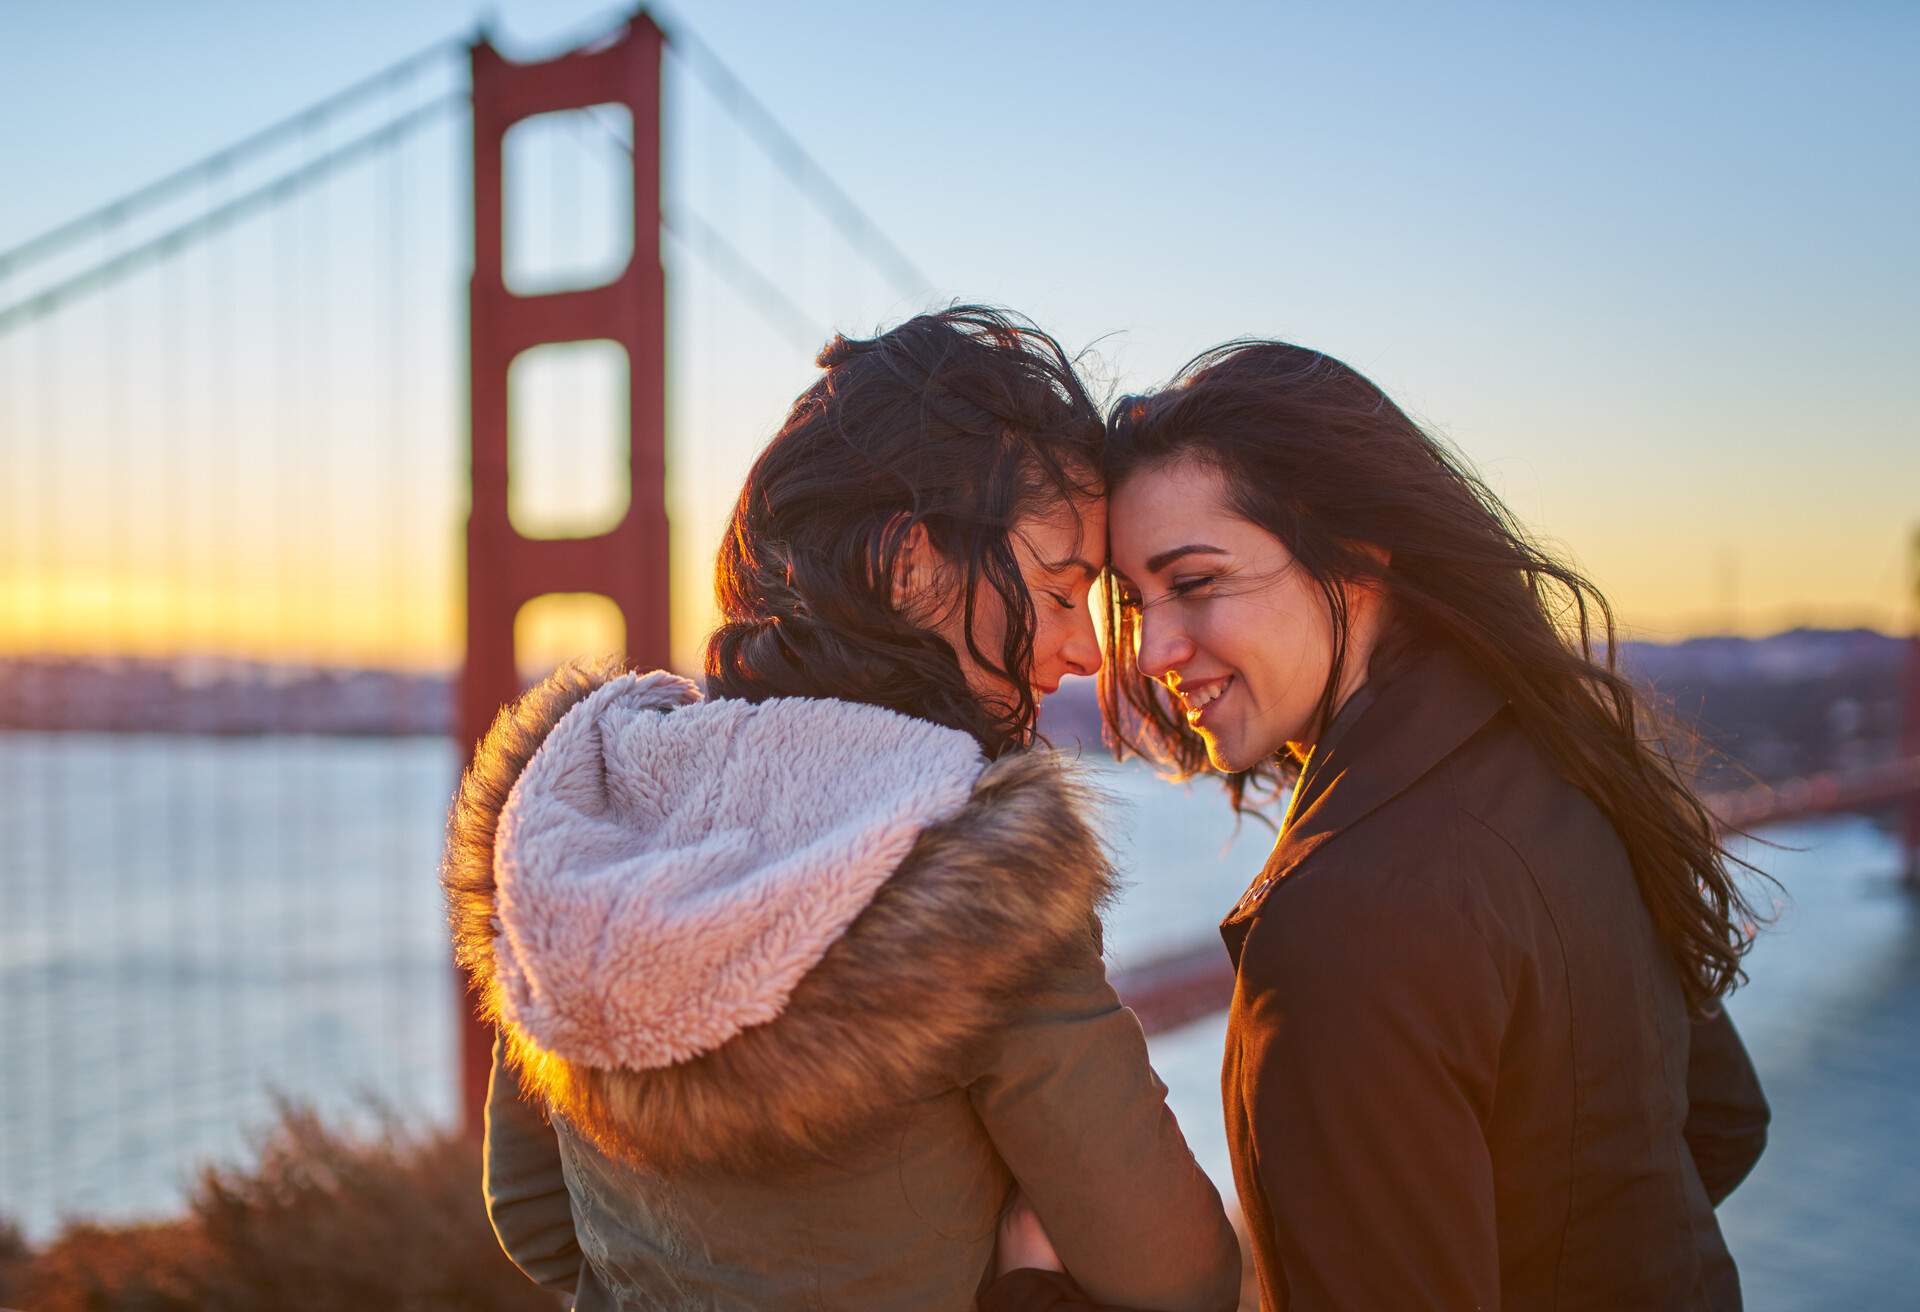 A flirty couple in love share an intimate moment, framed by the spectacular view of the Golden Gate Bridge, as a vivid and colourful sunrise bathes the scene in warm, romantic light.